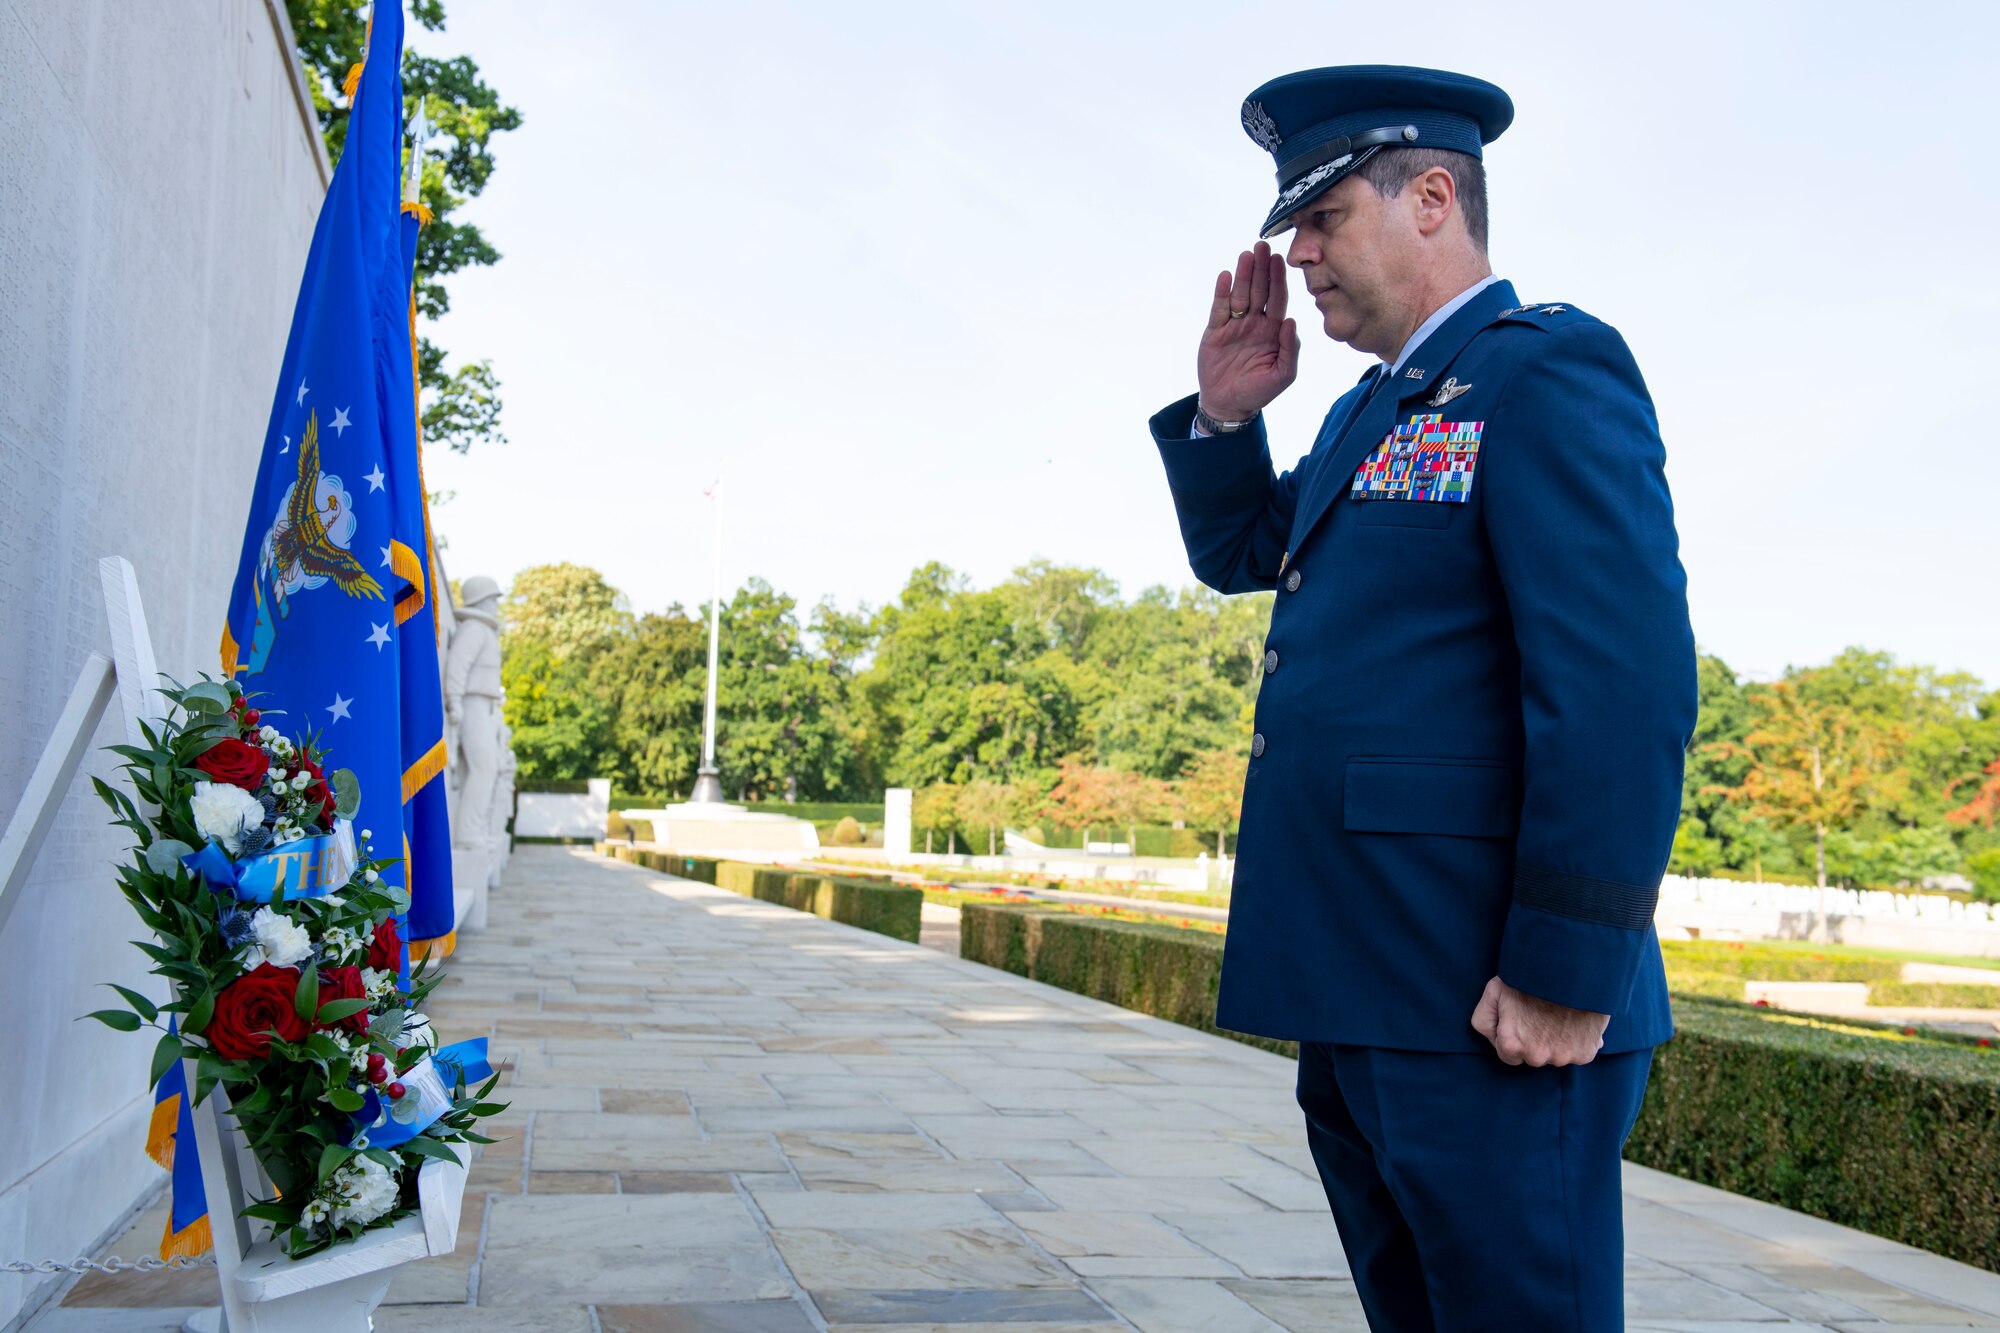 U.S. Air Force Maj. Gen. Andrew Gebara, 8th Air Force and Joint-Global Strike Operations Center commander, salutes at the Cambridge American Cemetery and Memorial, Madingley, England, Sept. 1, 2022. Leadership from the 501st Combat Support Wing joined the 8th Air Force commander and command chief, along with other U.S. Air Force leaders, to mark the 80th Anniversary of the formation of the Mighty Eighth Air Force and to commemorate those who gave their lives in the ultimate sacrifice. (U.S. Air Force photo by Senior Airman Jennifer Zima)